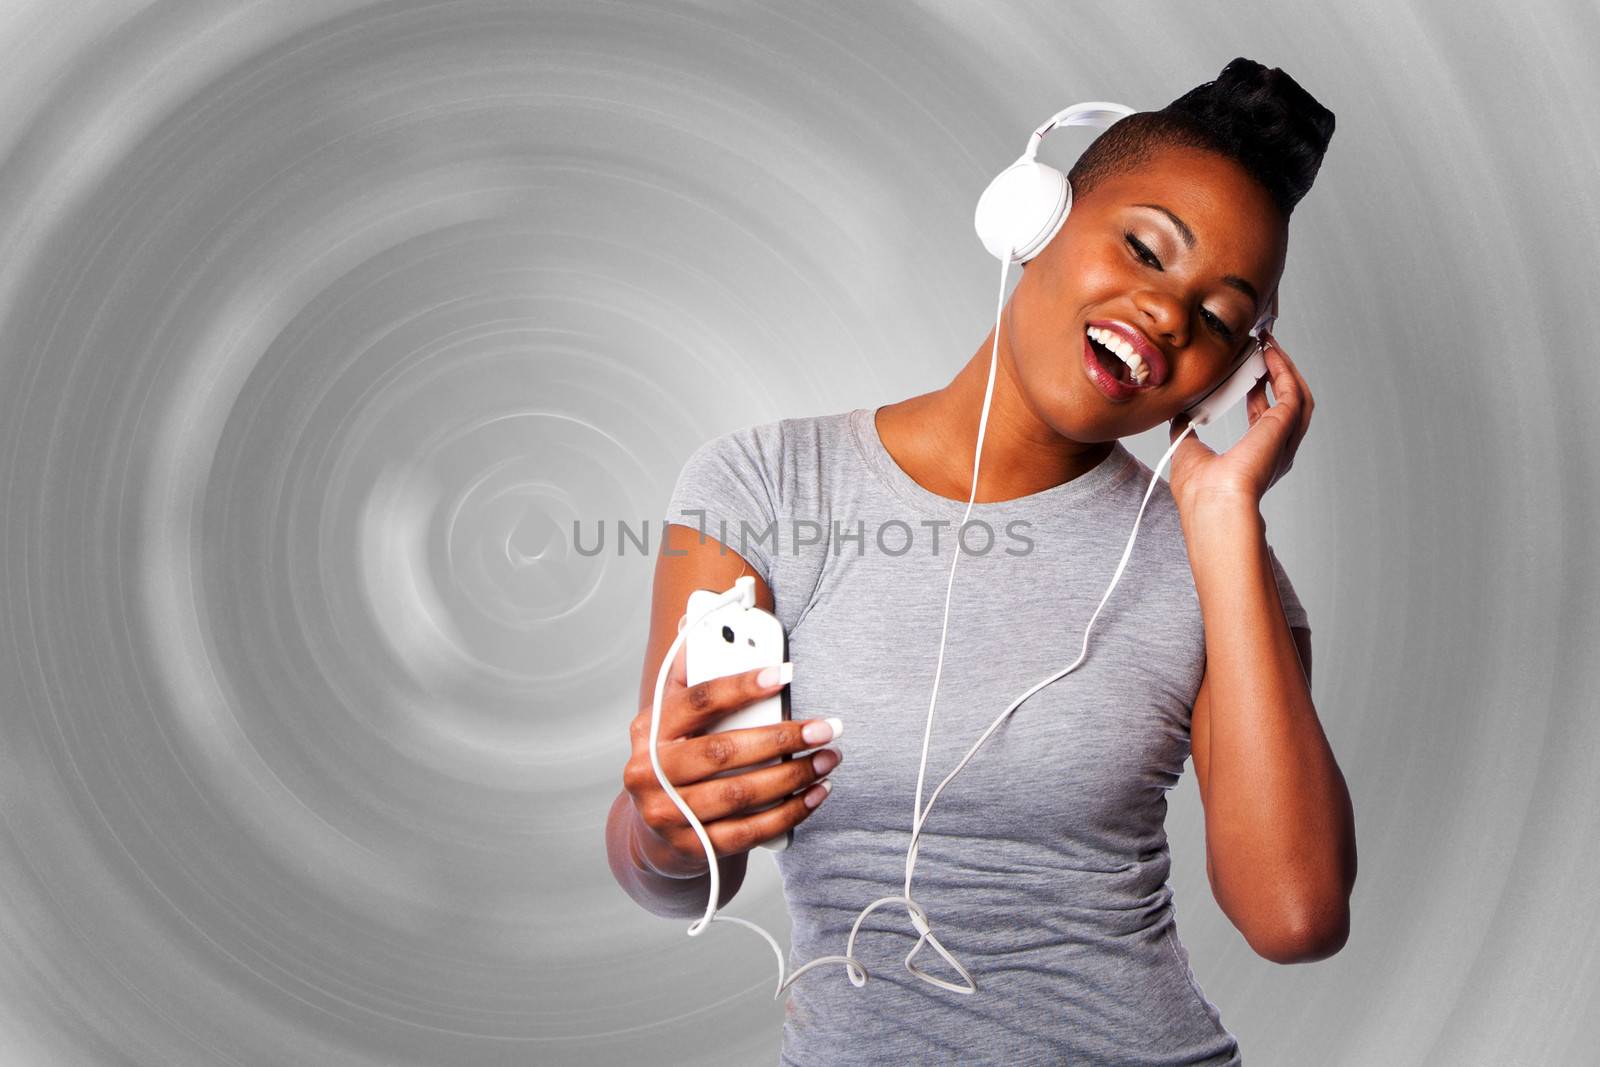 Beautiful young woman with headphones and mobile device listening grooving singing to music, gray circular background.